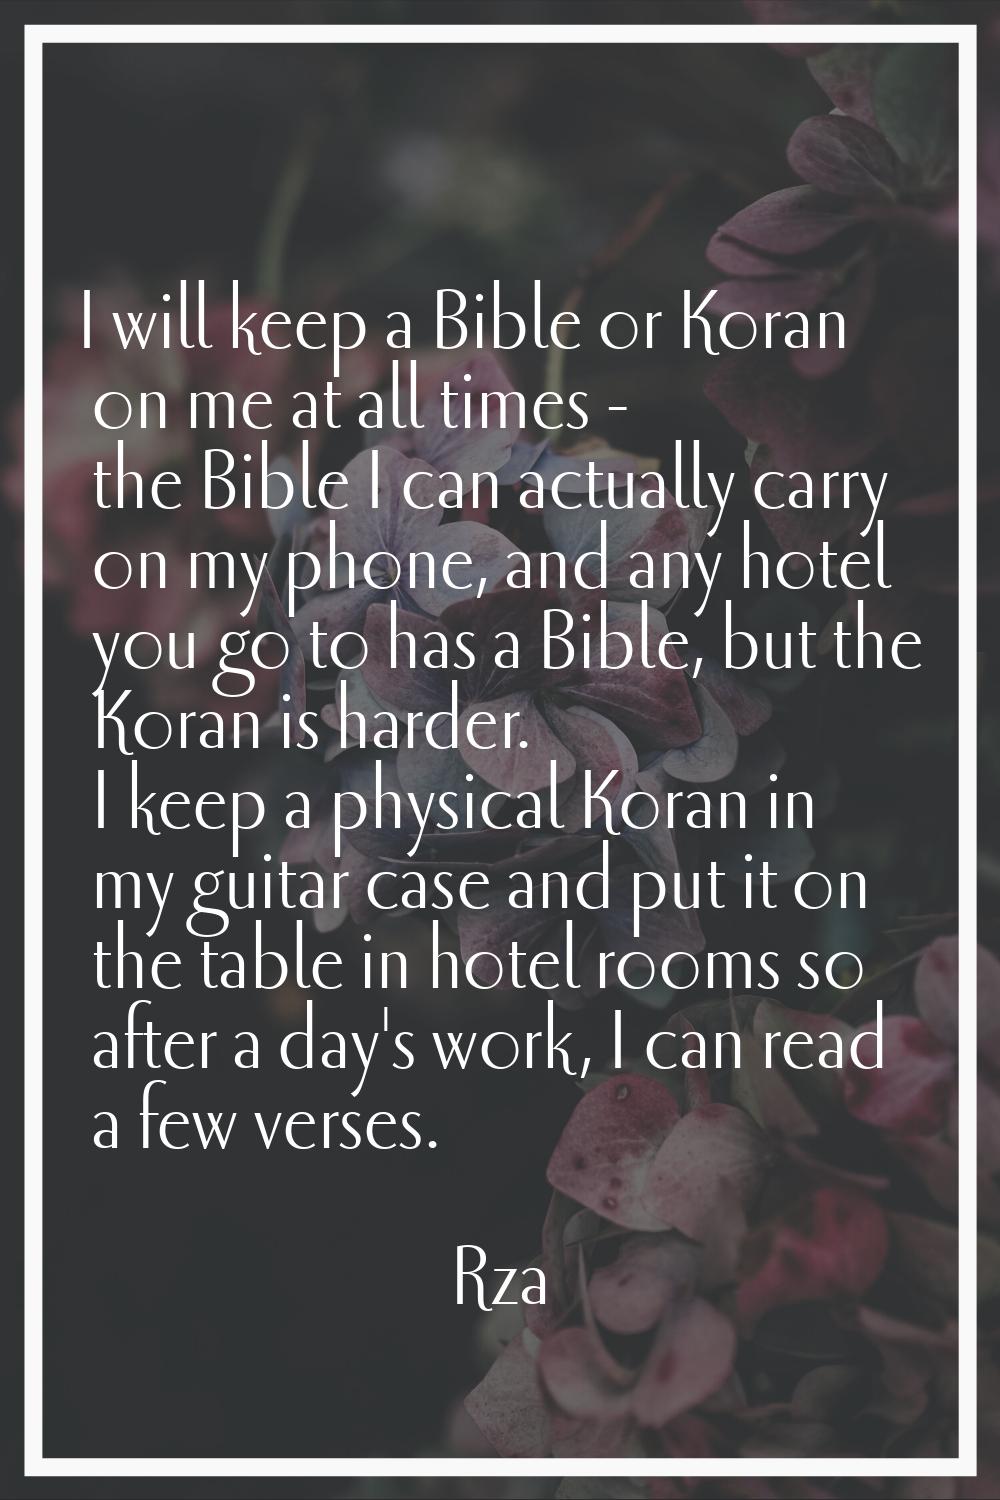 I will keep a Bible or Koran on me at all times - the Bible I can actually carry on my phone, and a